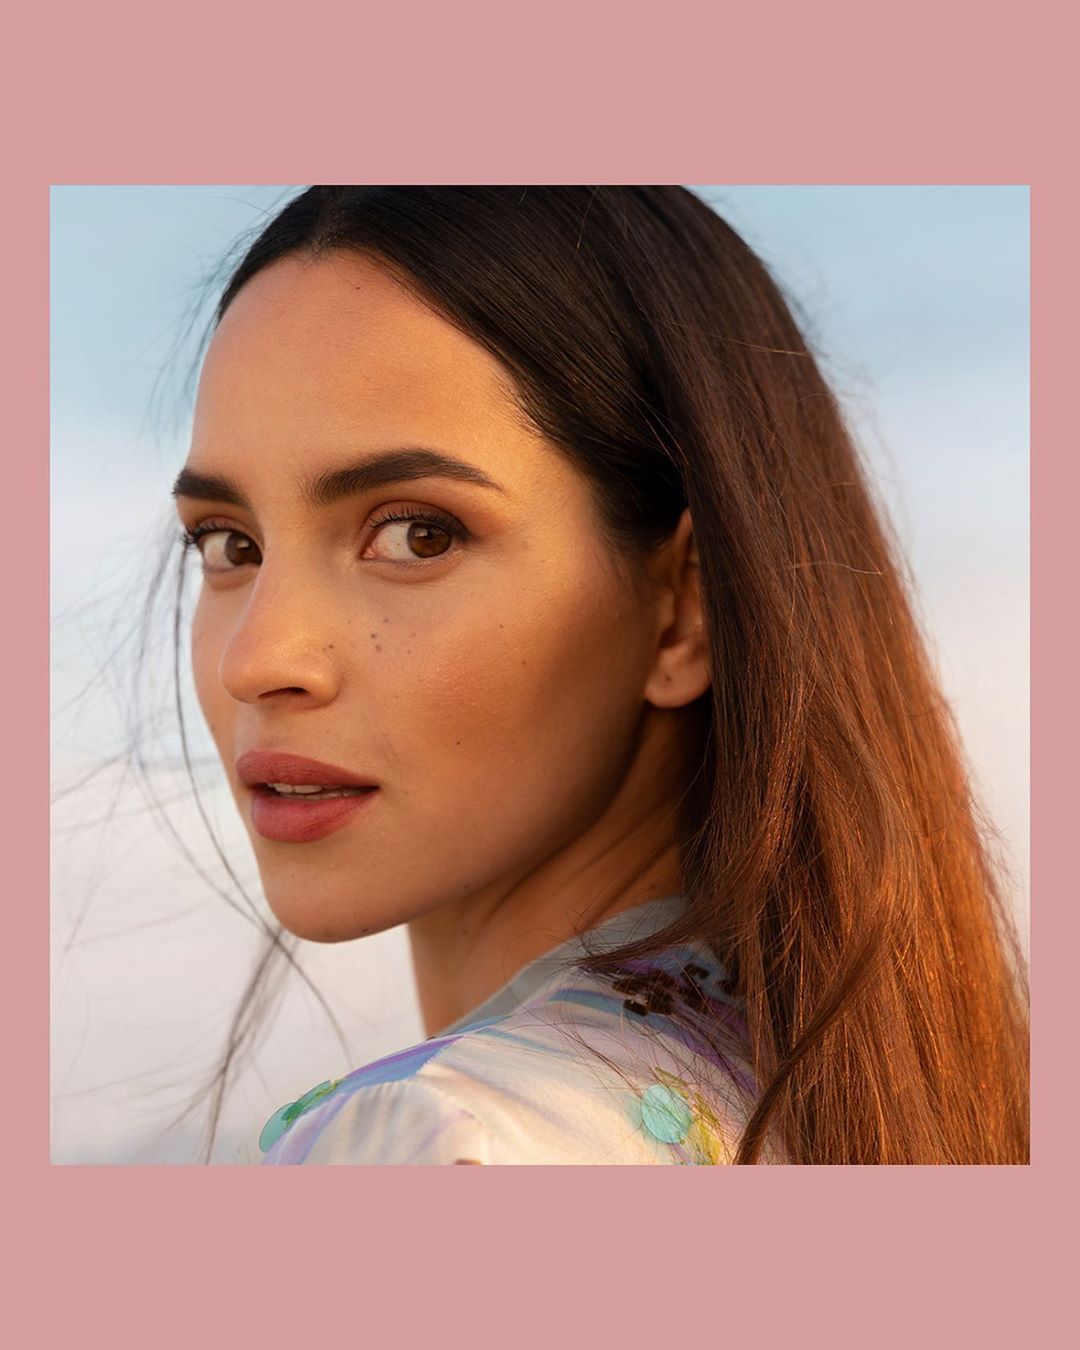 Giorgio Armani - I AM WHAT I LIVE.
 
Join Adria Arjona, face of MY WAY the new feminine fragrance by Giorgio Armani, as she confidently follows her instincts, forms deep human connections and forges h...